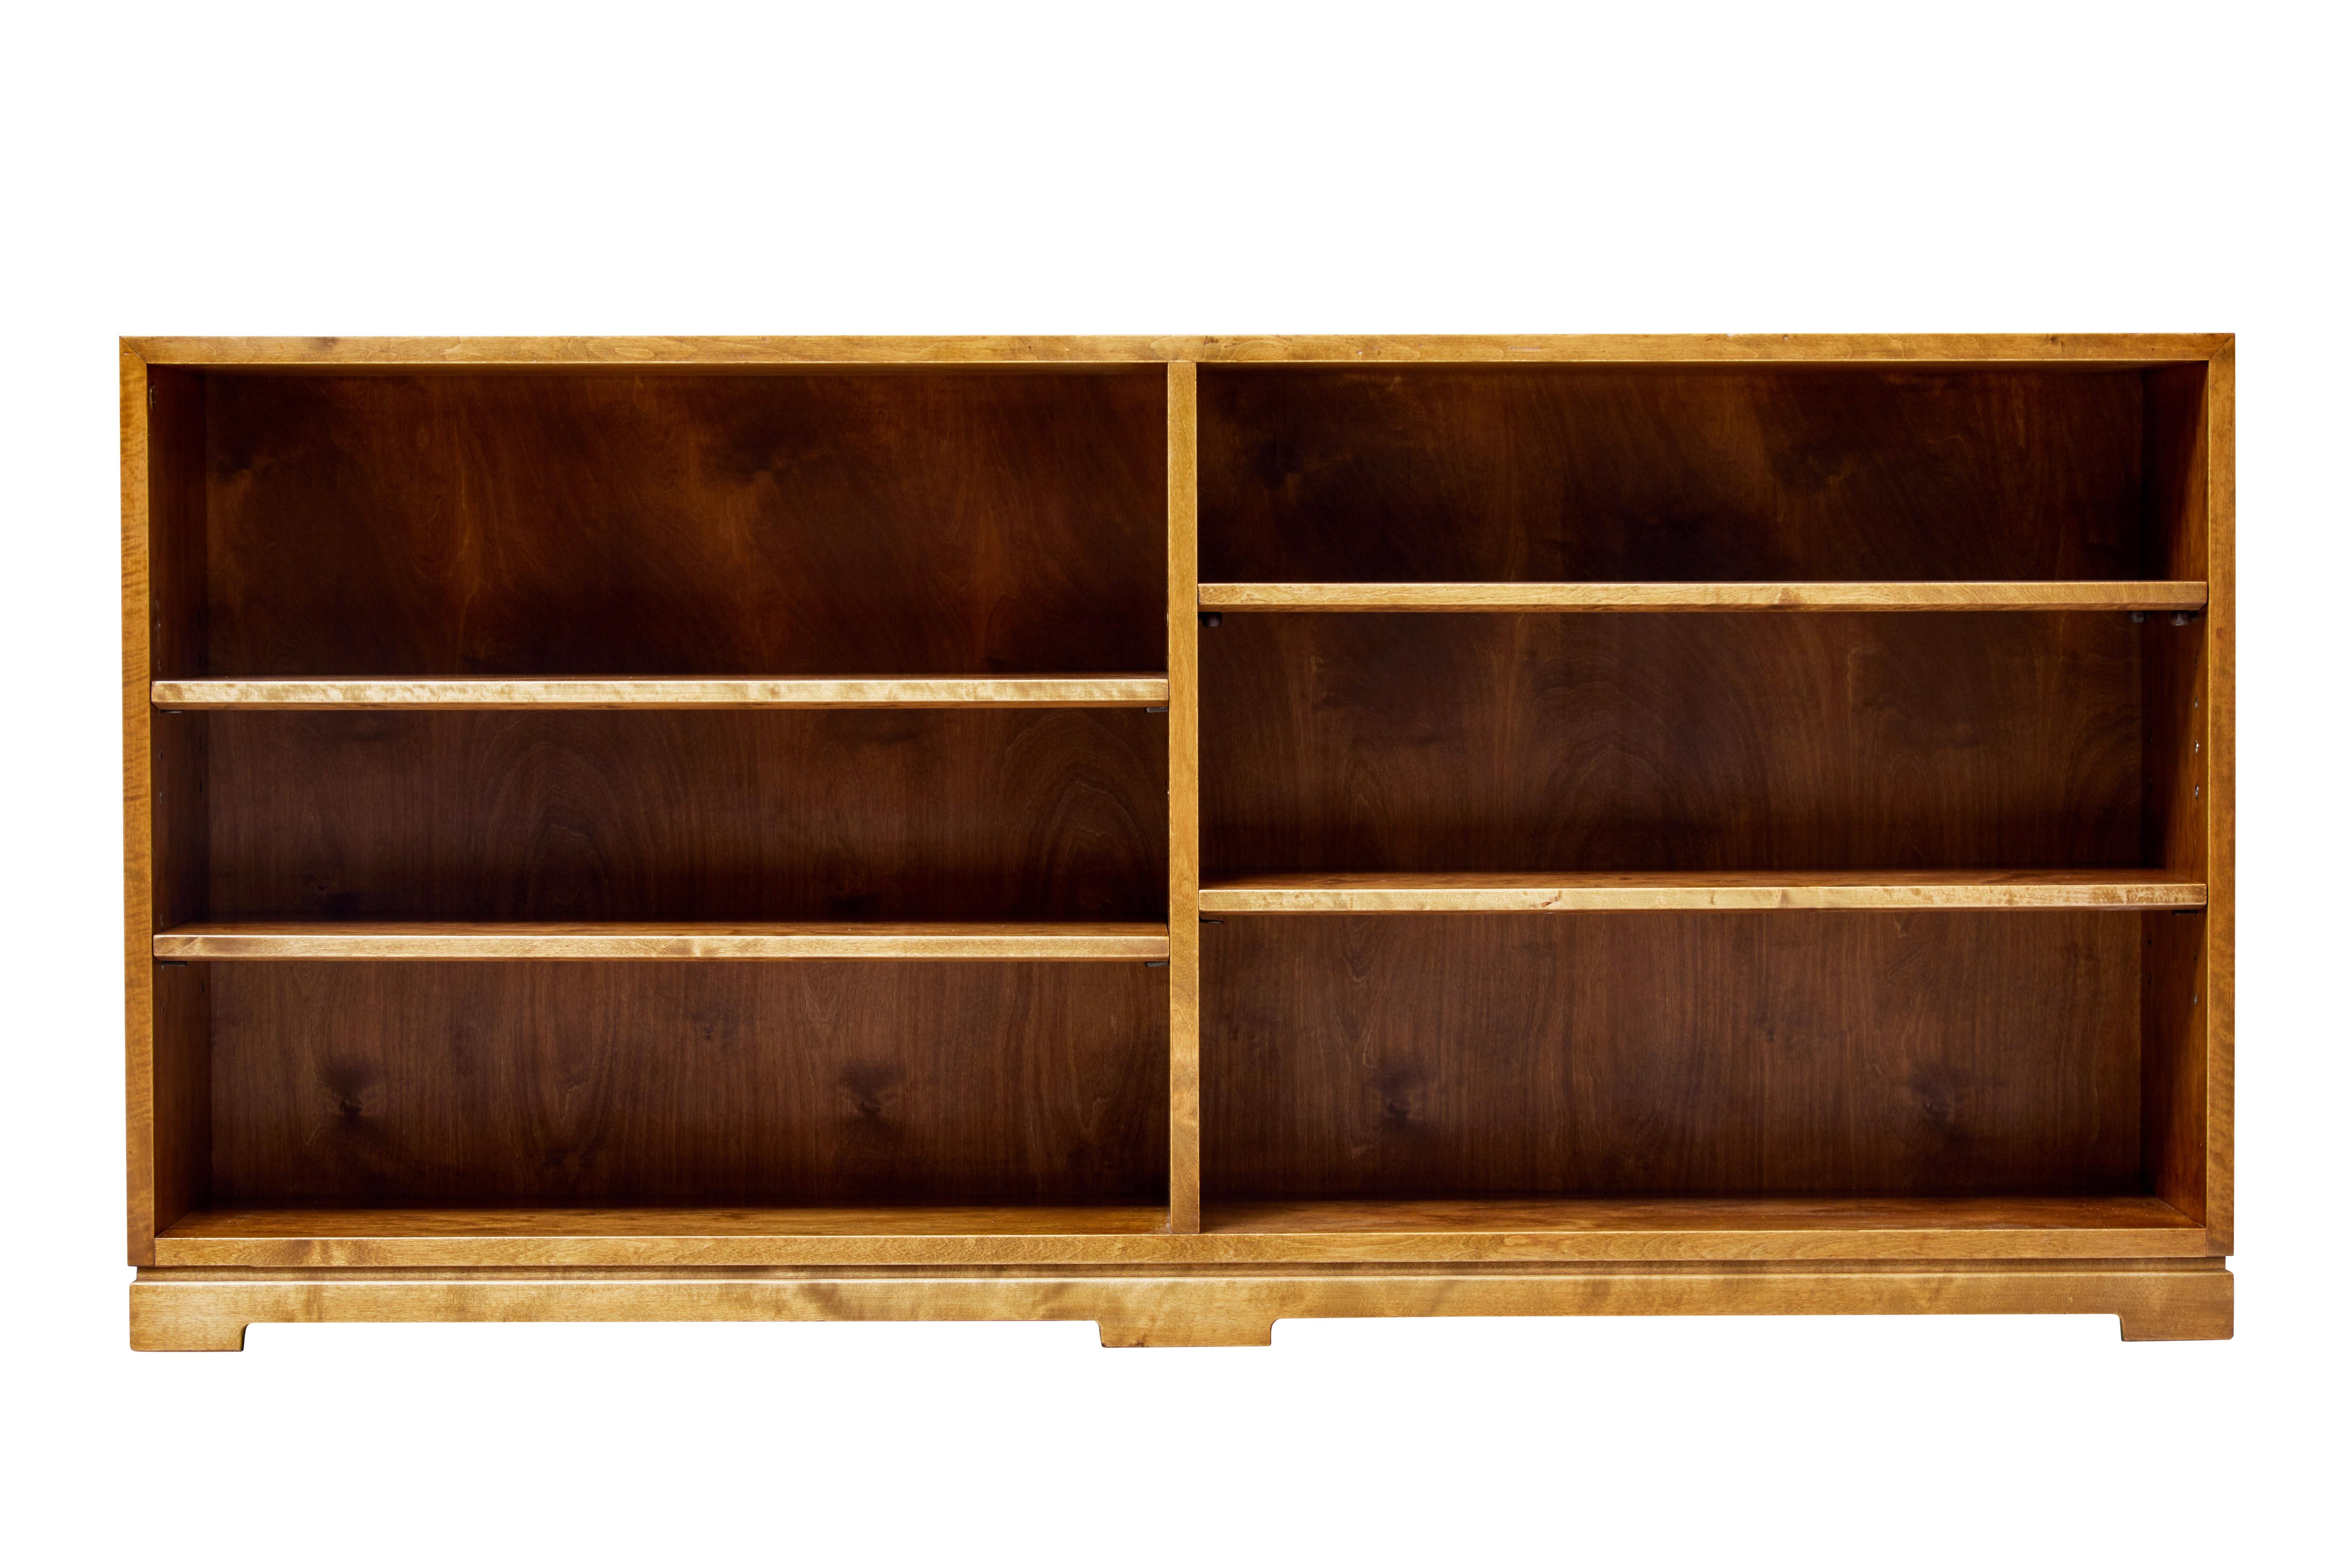 Simple and elegant low open bookcase, circa 1940.

Two shelves either side of a central partition. Each shelf is fully adjustable to allow accommodation of different book sizes.

Recently restored back to its former golden rich color.